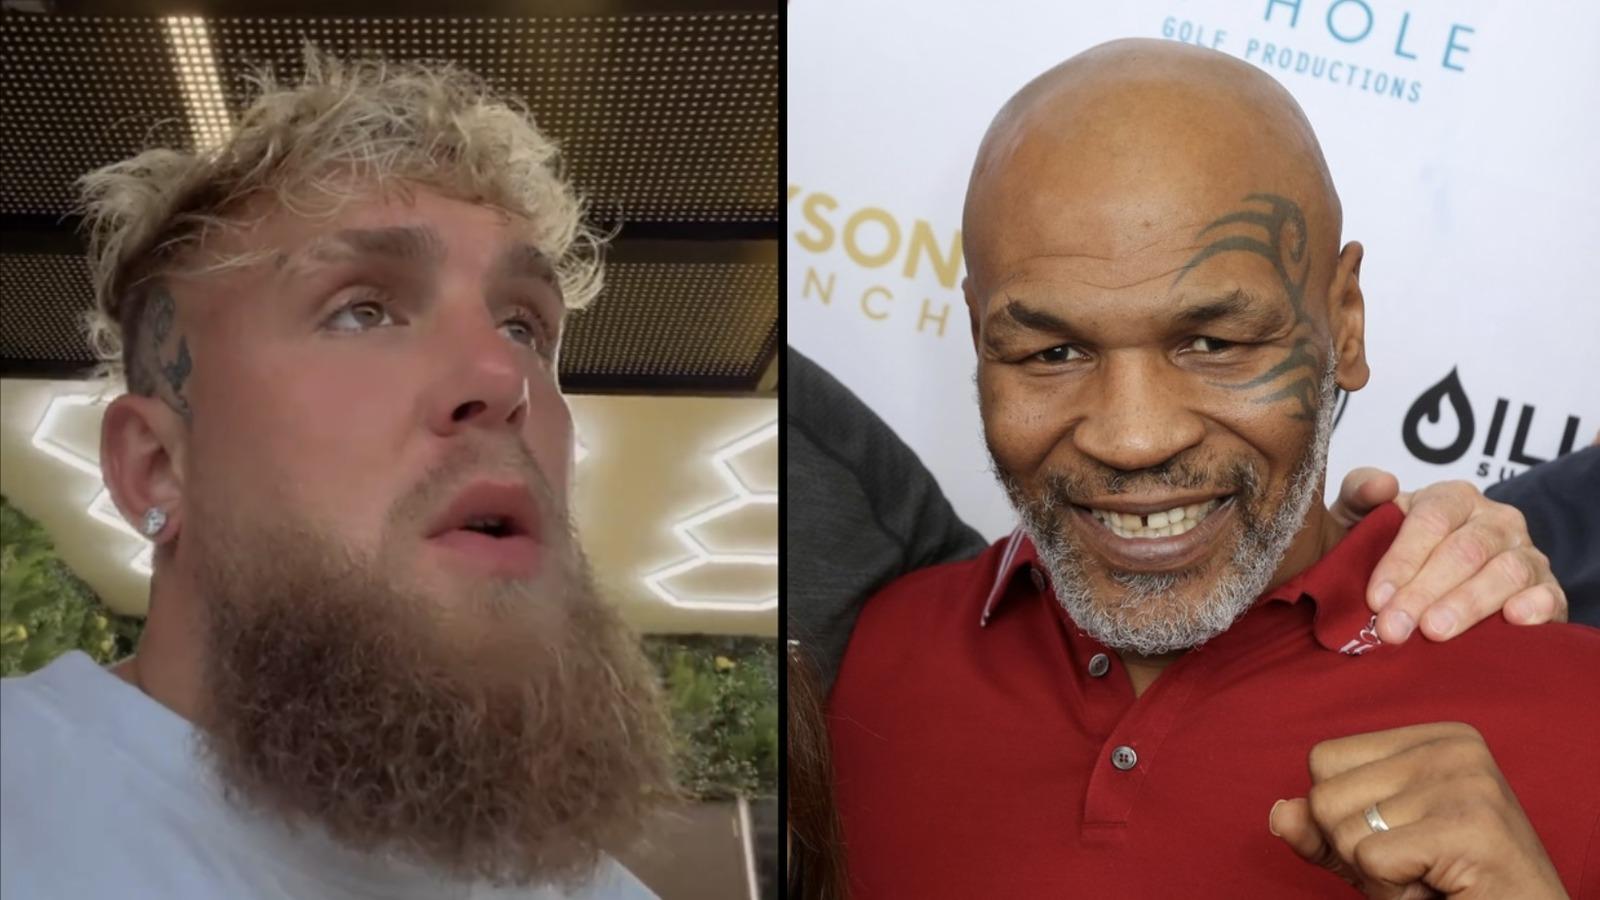 Jake Paul says he is “heartbroken” over the decision to postpone his boxing match vs Mike Tyson